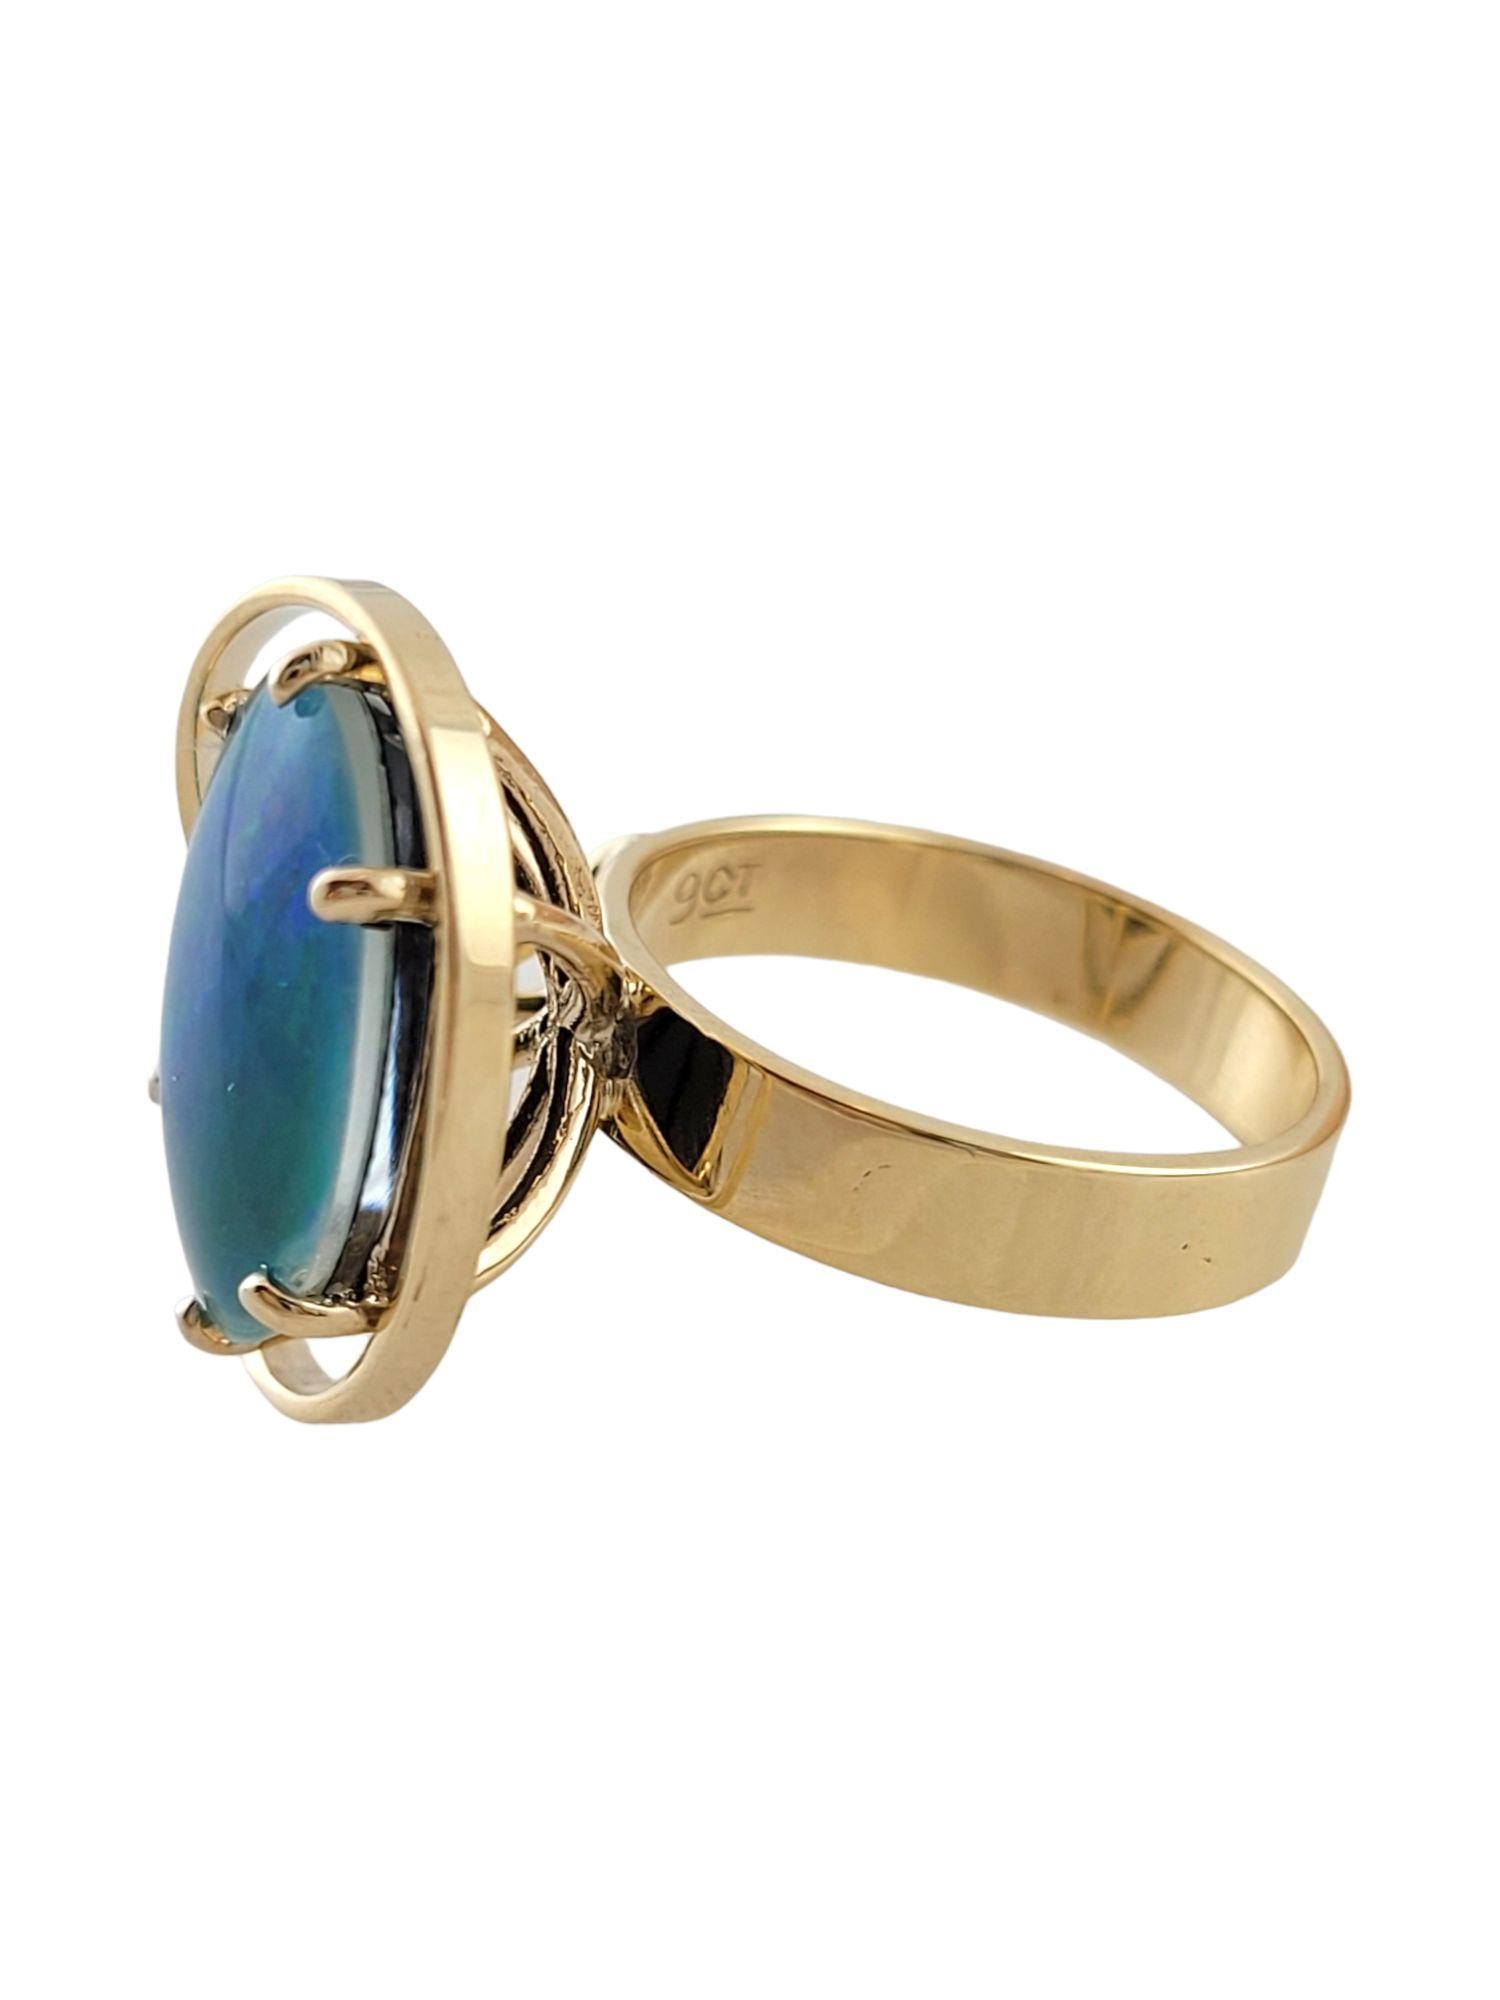 This gorgeous 9K yellow gold ring has a beautiful black opal triplet stone!

Black opal triplet is slightly included with play of color. Blue - green multicolor and good cut.

Ring size: 6.25-6.5

Shank: 4mm

Front: 19.6mm X 15.3mm X 109mm

Weight: